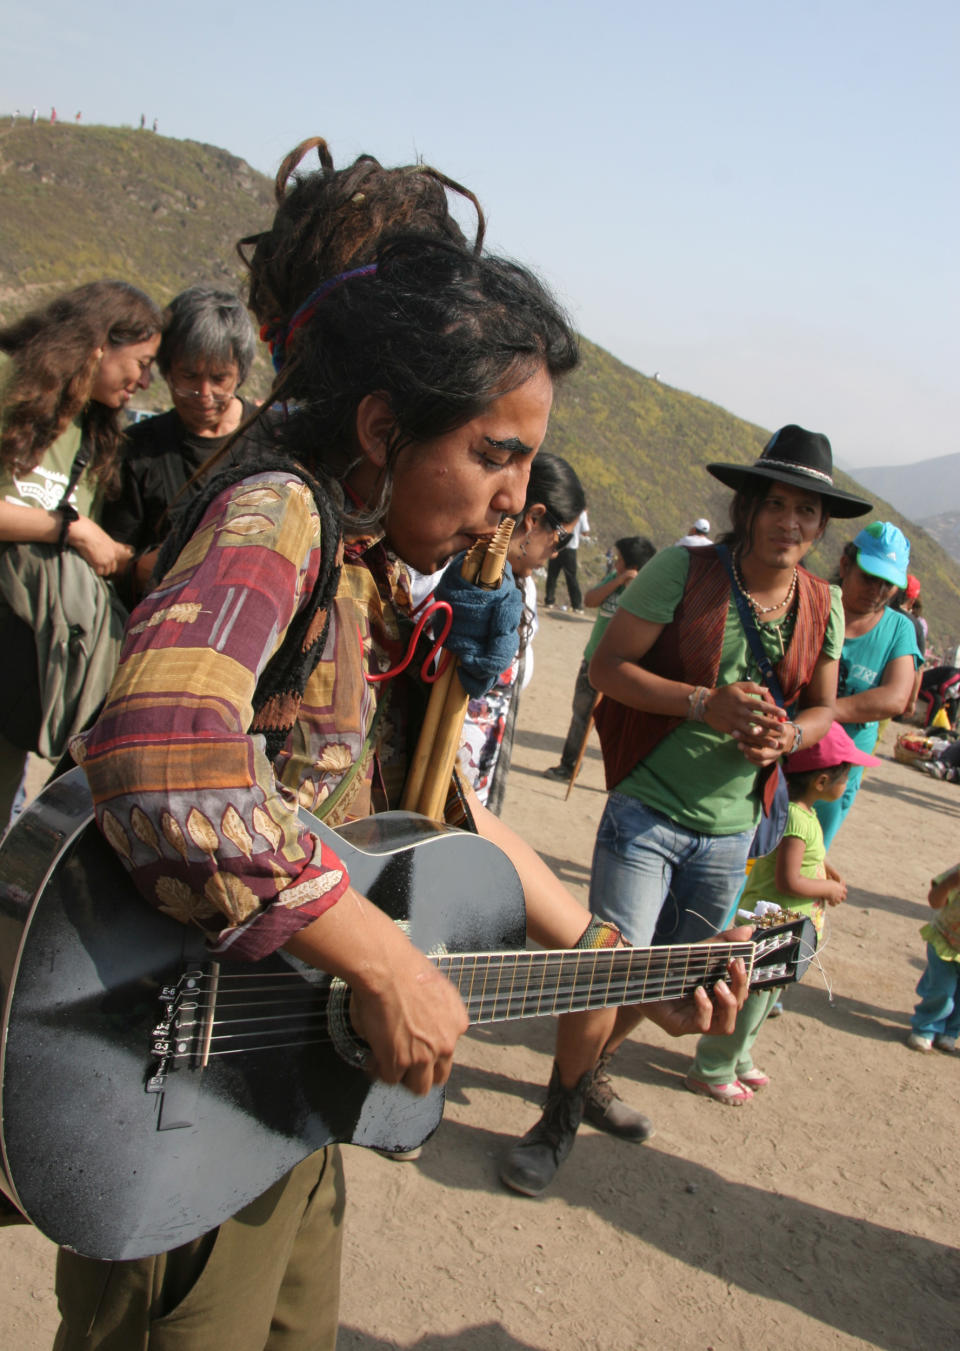 In this Nov. 1, 2012 photo, Luis Miguel Rogue plays a guitar and pan flute during the Day of the Dead festival at the Cemetery of Nueva Esperanza in Villa Maria del Triunfo in Lima, Peru. Rogue is part of the procession of Santa Muerte. (AP Photo/Jody Kurash)